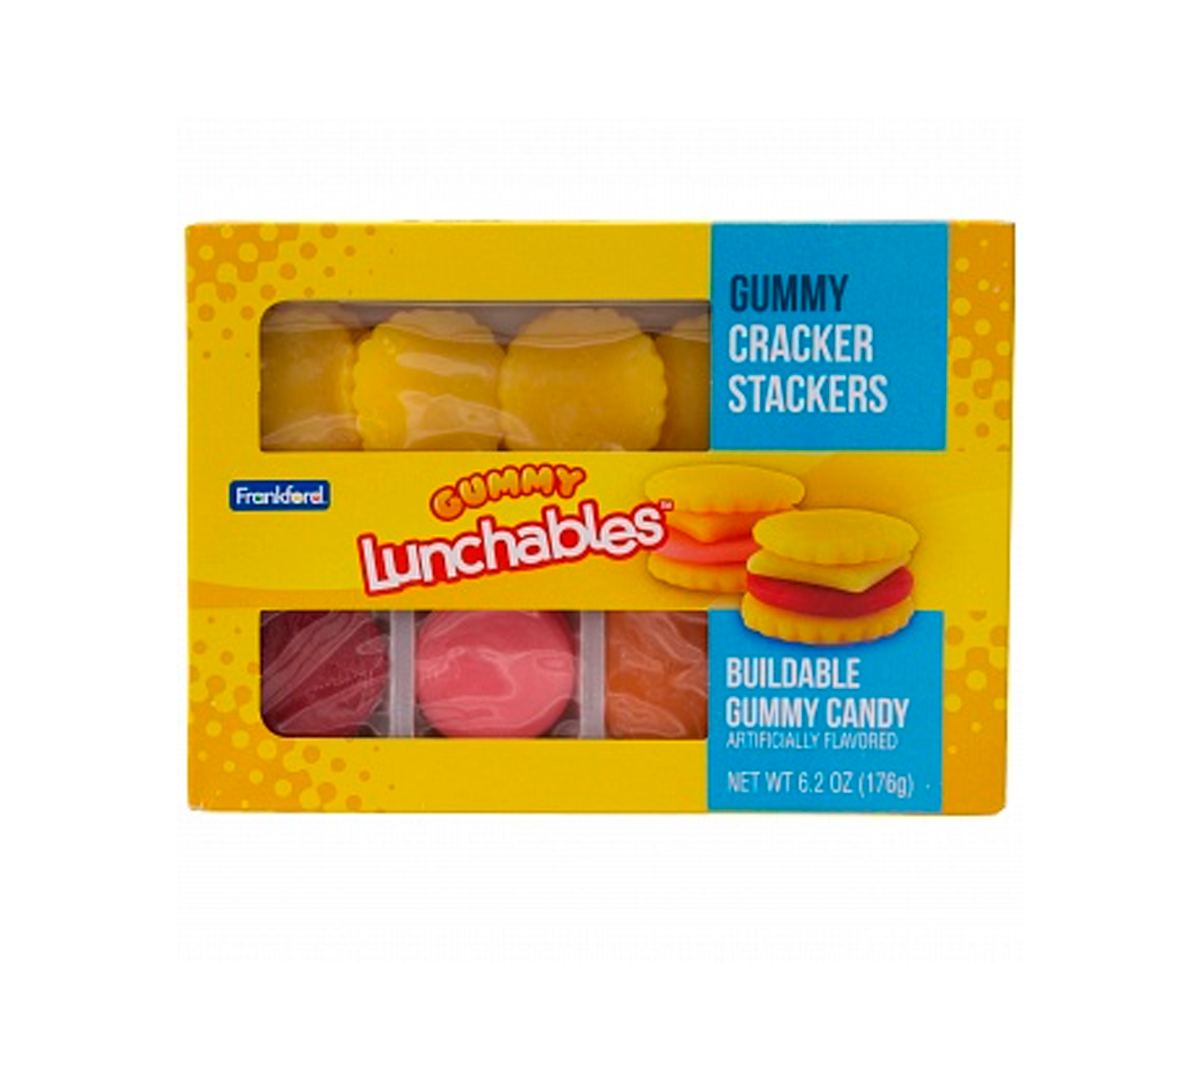 Frankford Gummy Lunchables Cracker Stackers 